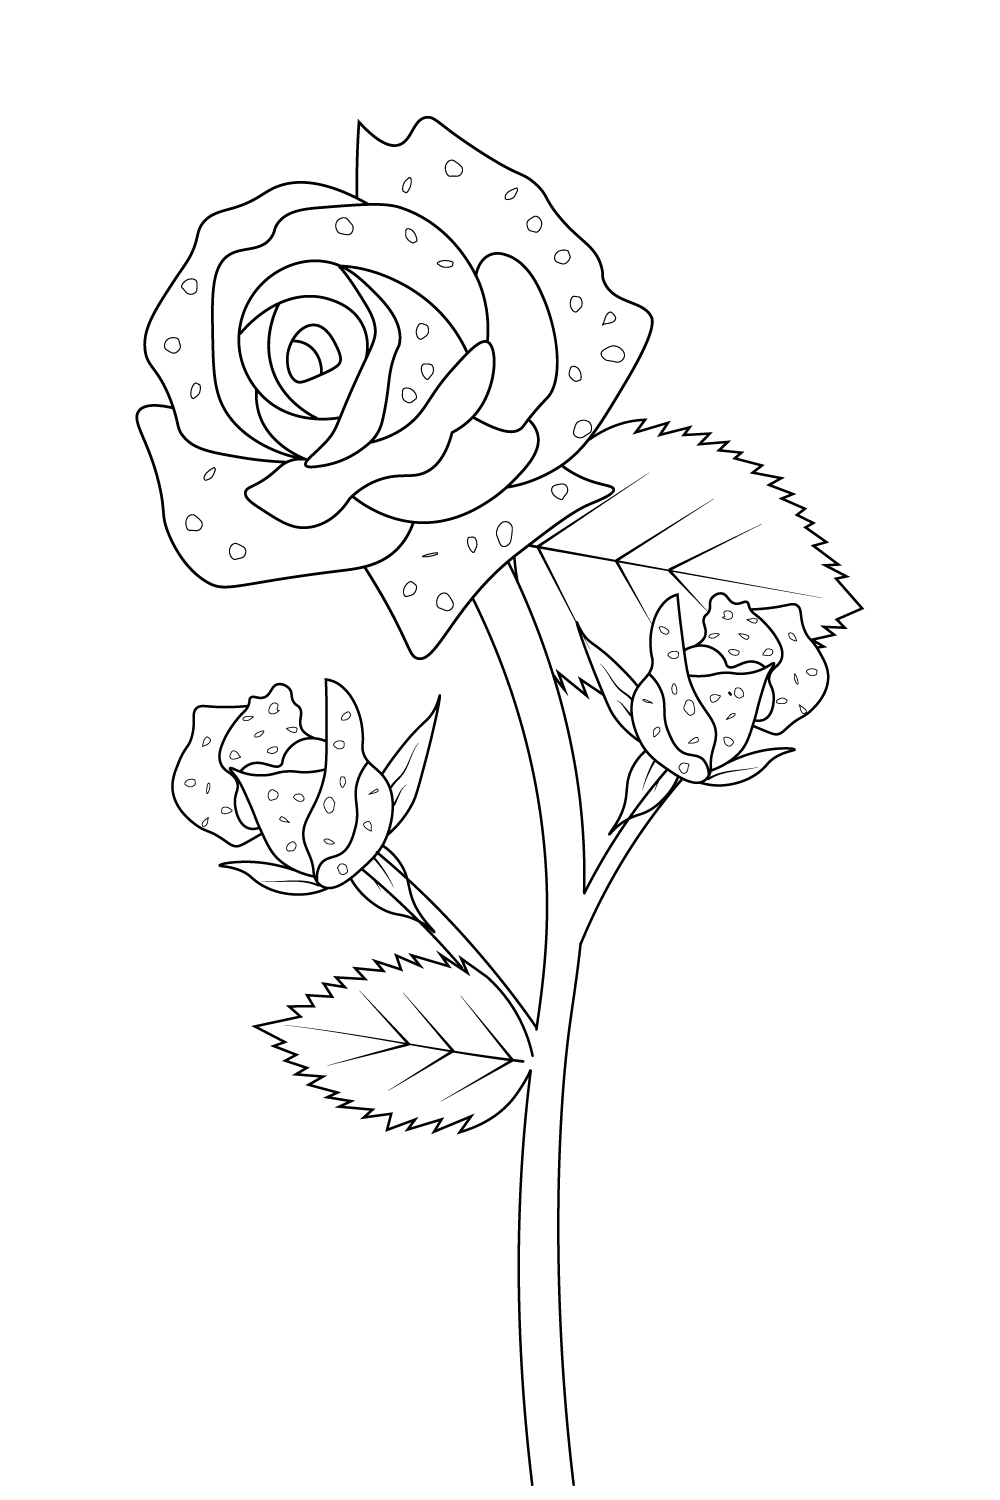 rose vector, rose vector black and white, vector rose flower clipart black and white, rose clipart black and white, simple rose outline, realistic rose outline, line drawing realistic rose outline pinterest preview image.